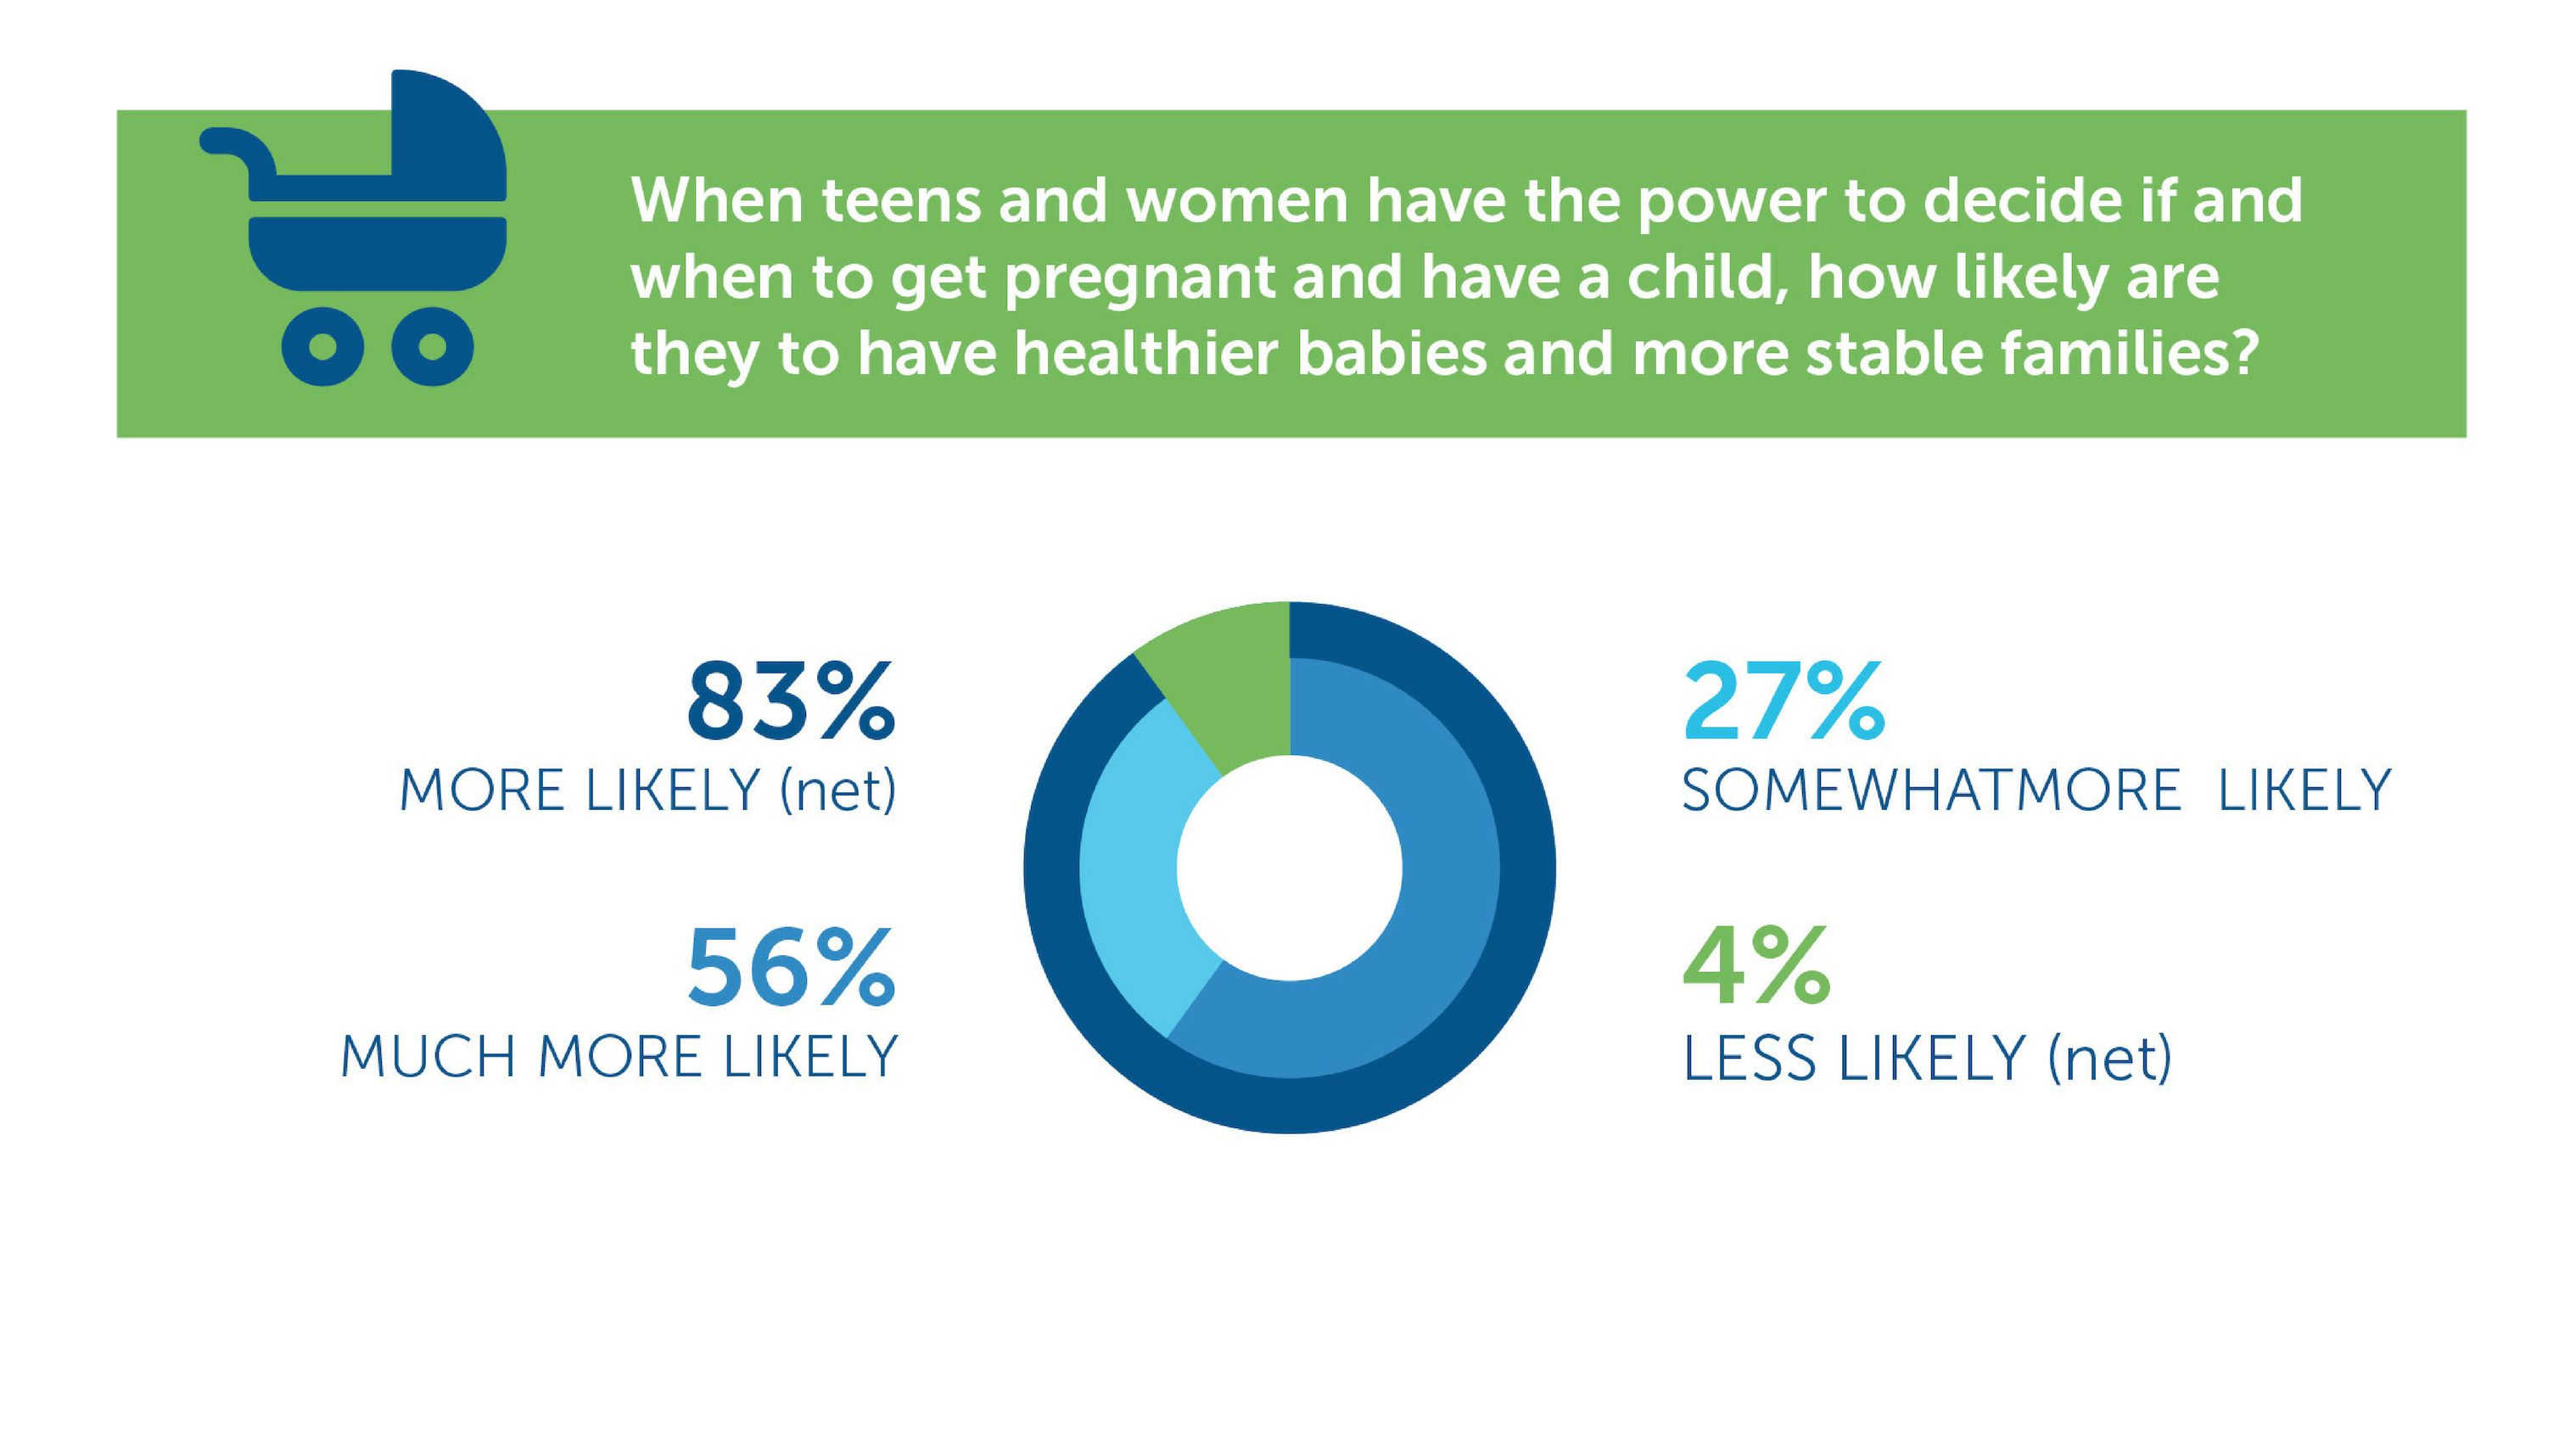 When teens and women have the power to decide if and when to get pregnant and have a child, how likely are they to have healthier babies and more stable families?